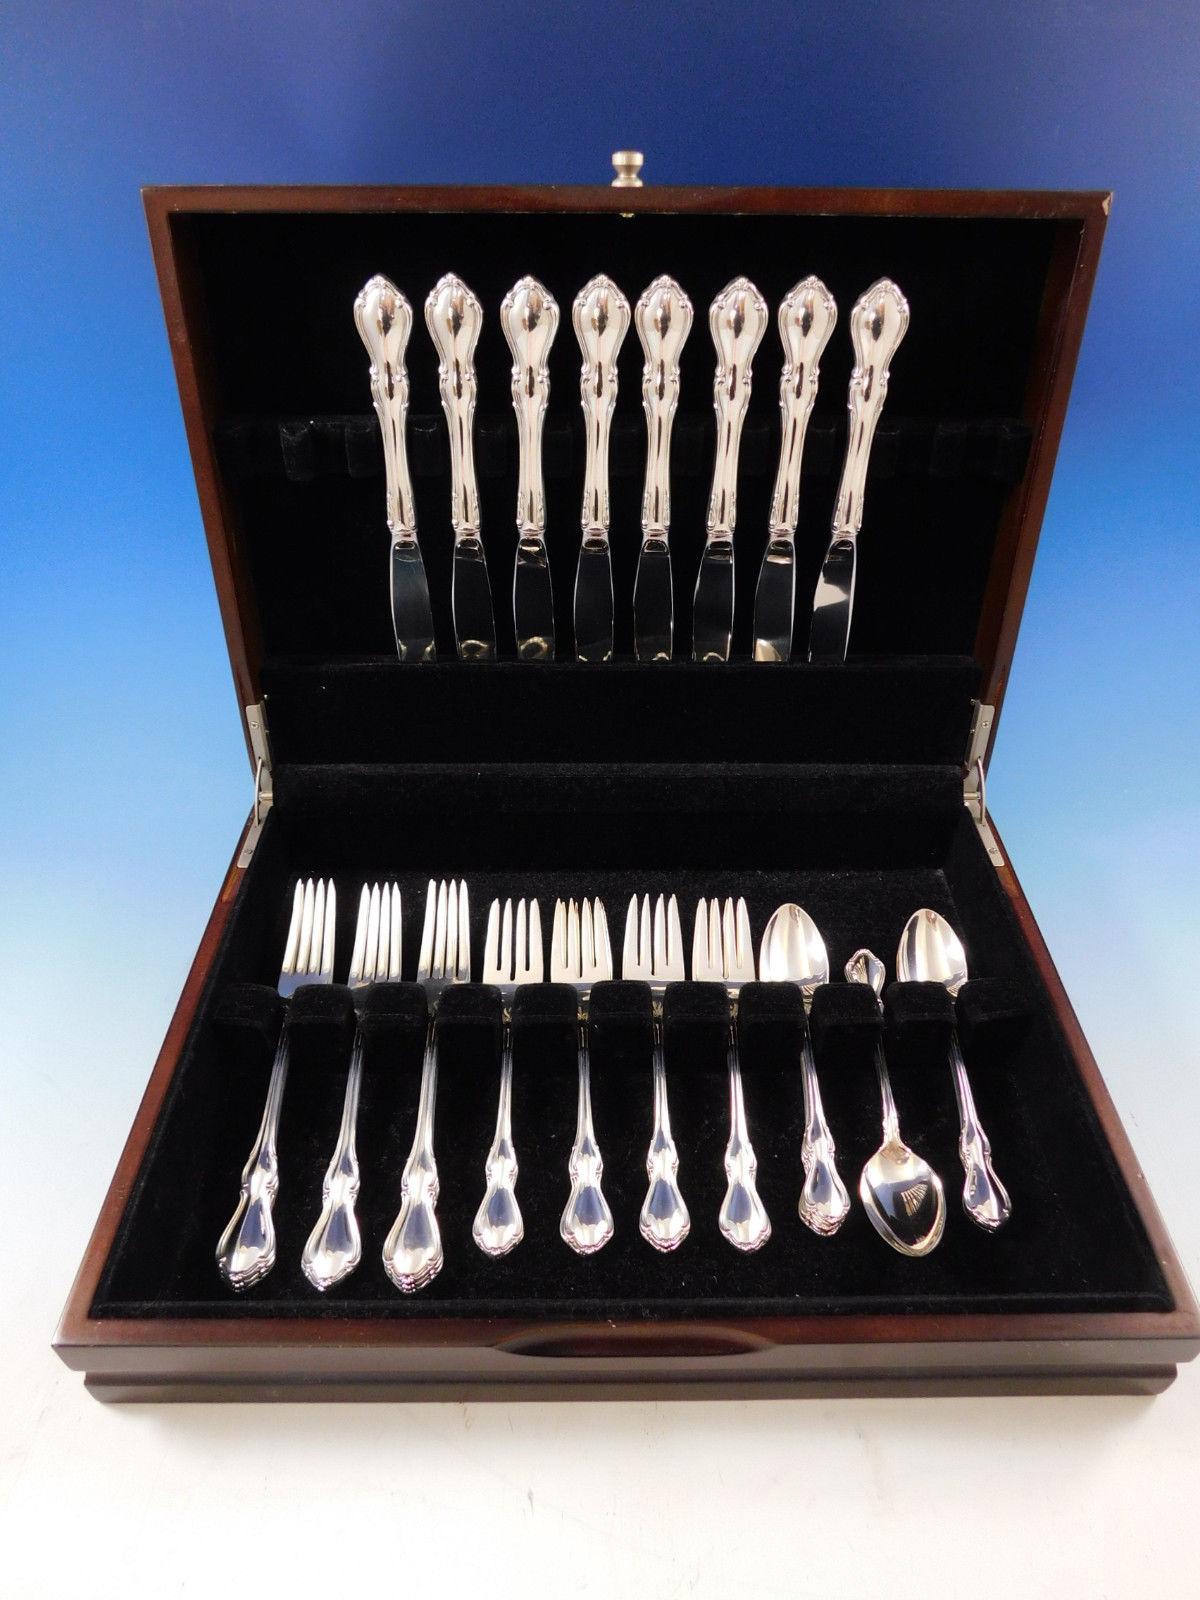 Hampton Court by Reed and Barton sterling silver flatware set - 32 pieces. This set includes:

8 knives, 9 1/8